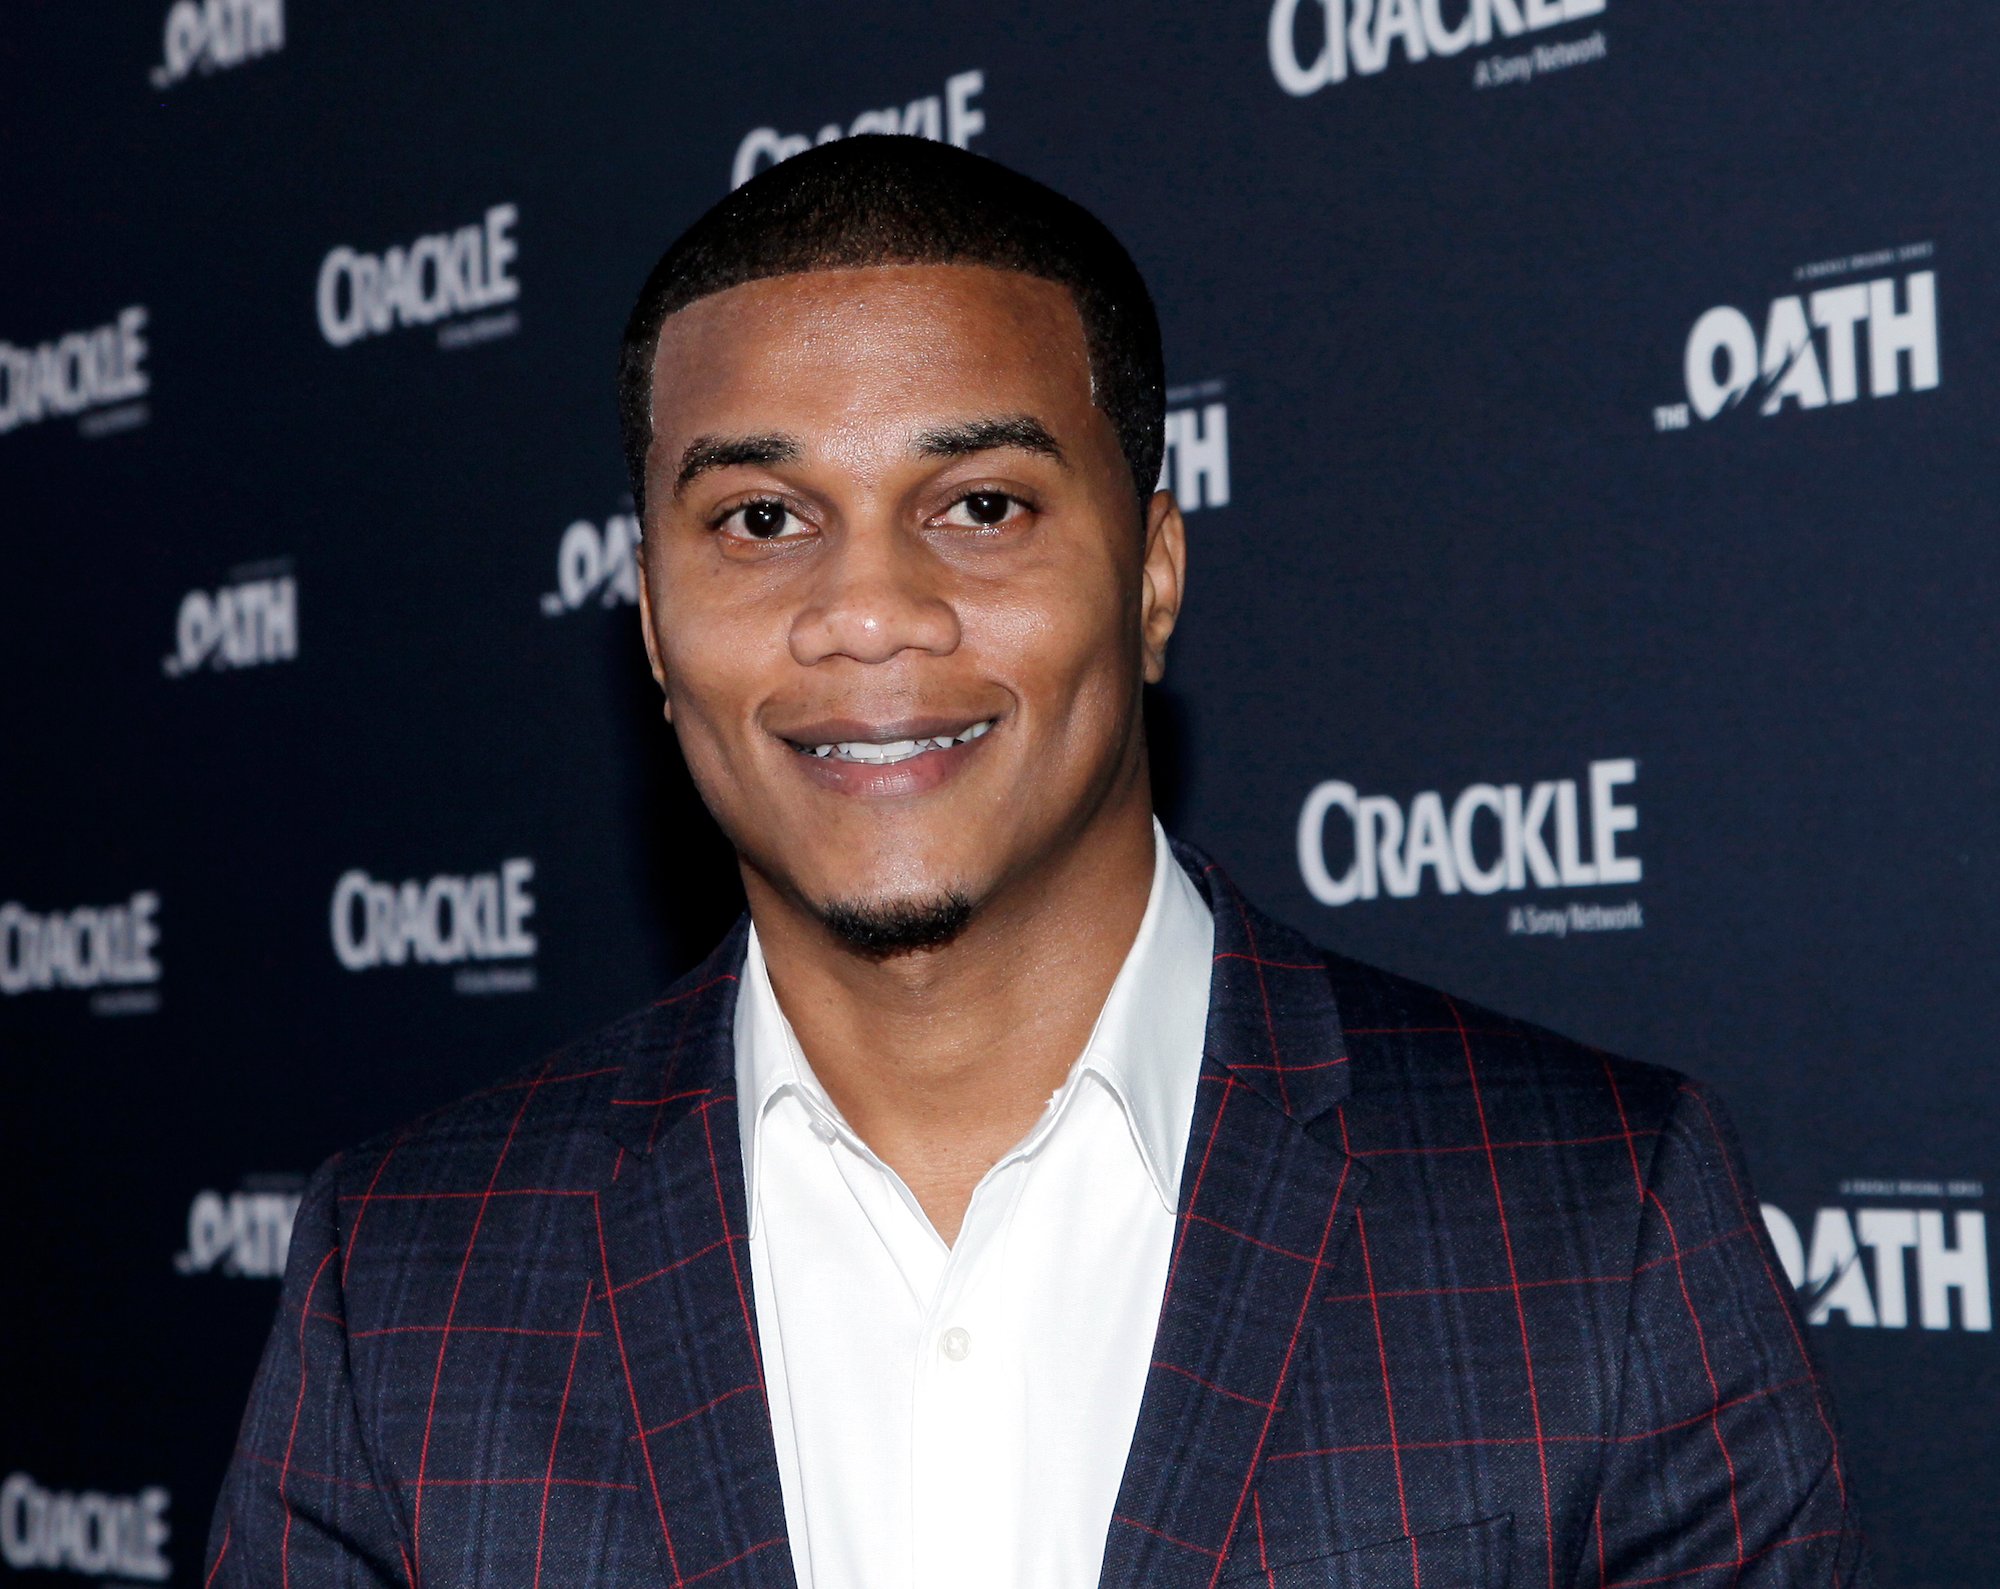 Cory Hardrict wearing a blue and red suit to the premiere of Crackle's 'The Oath.'